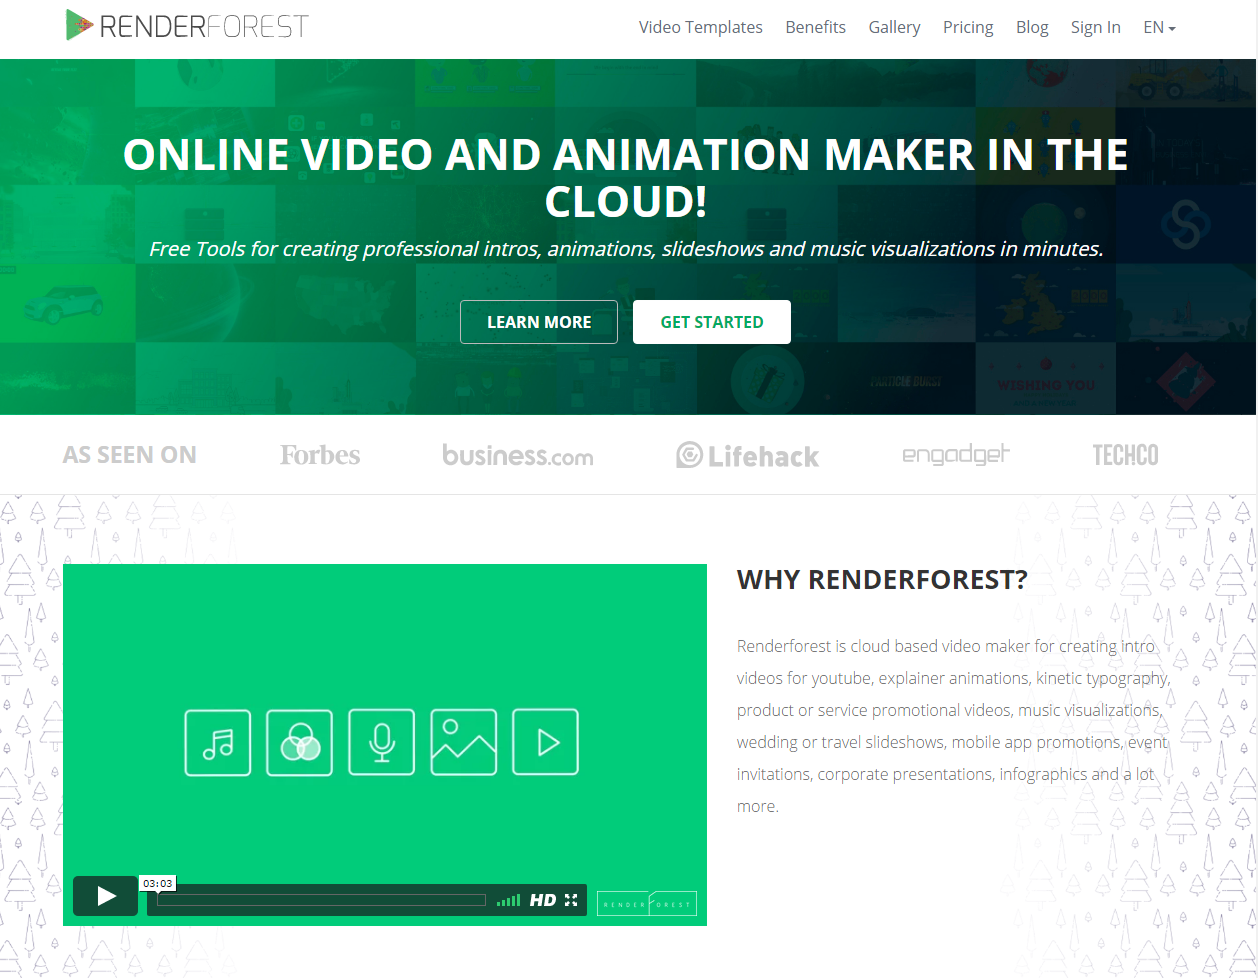 Renderforest is another option for online video and animation creation